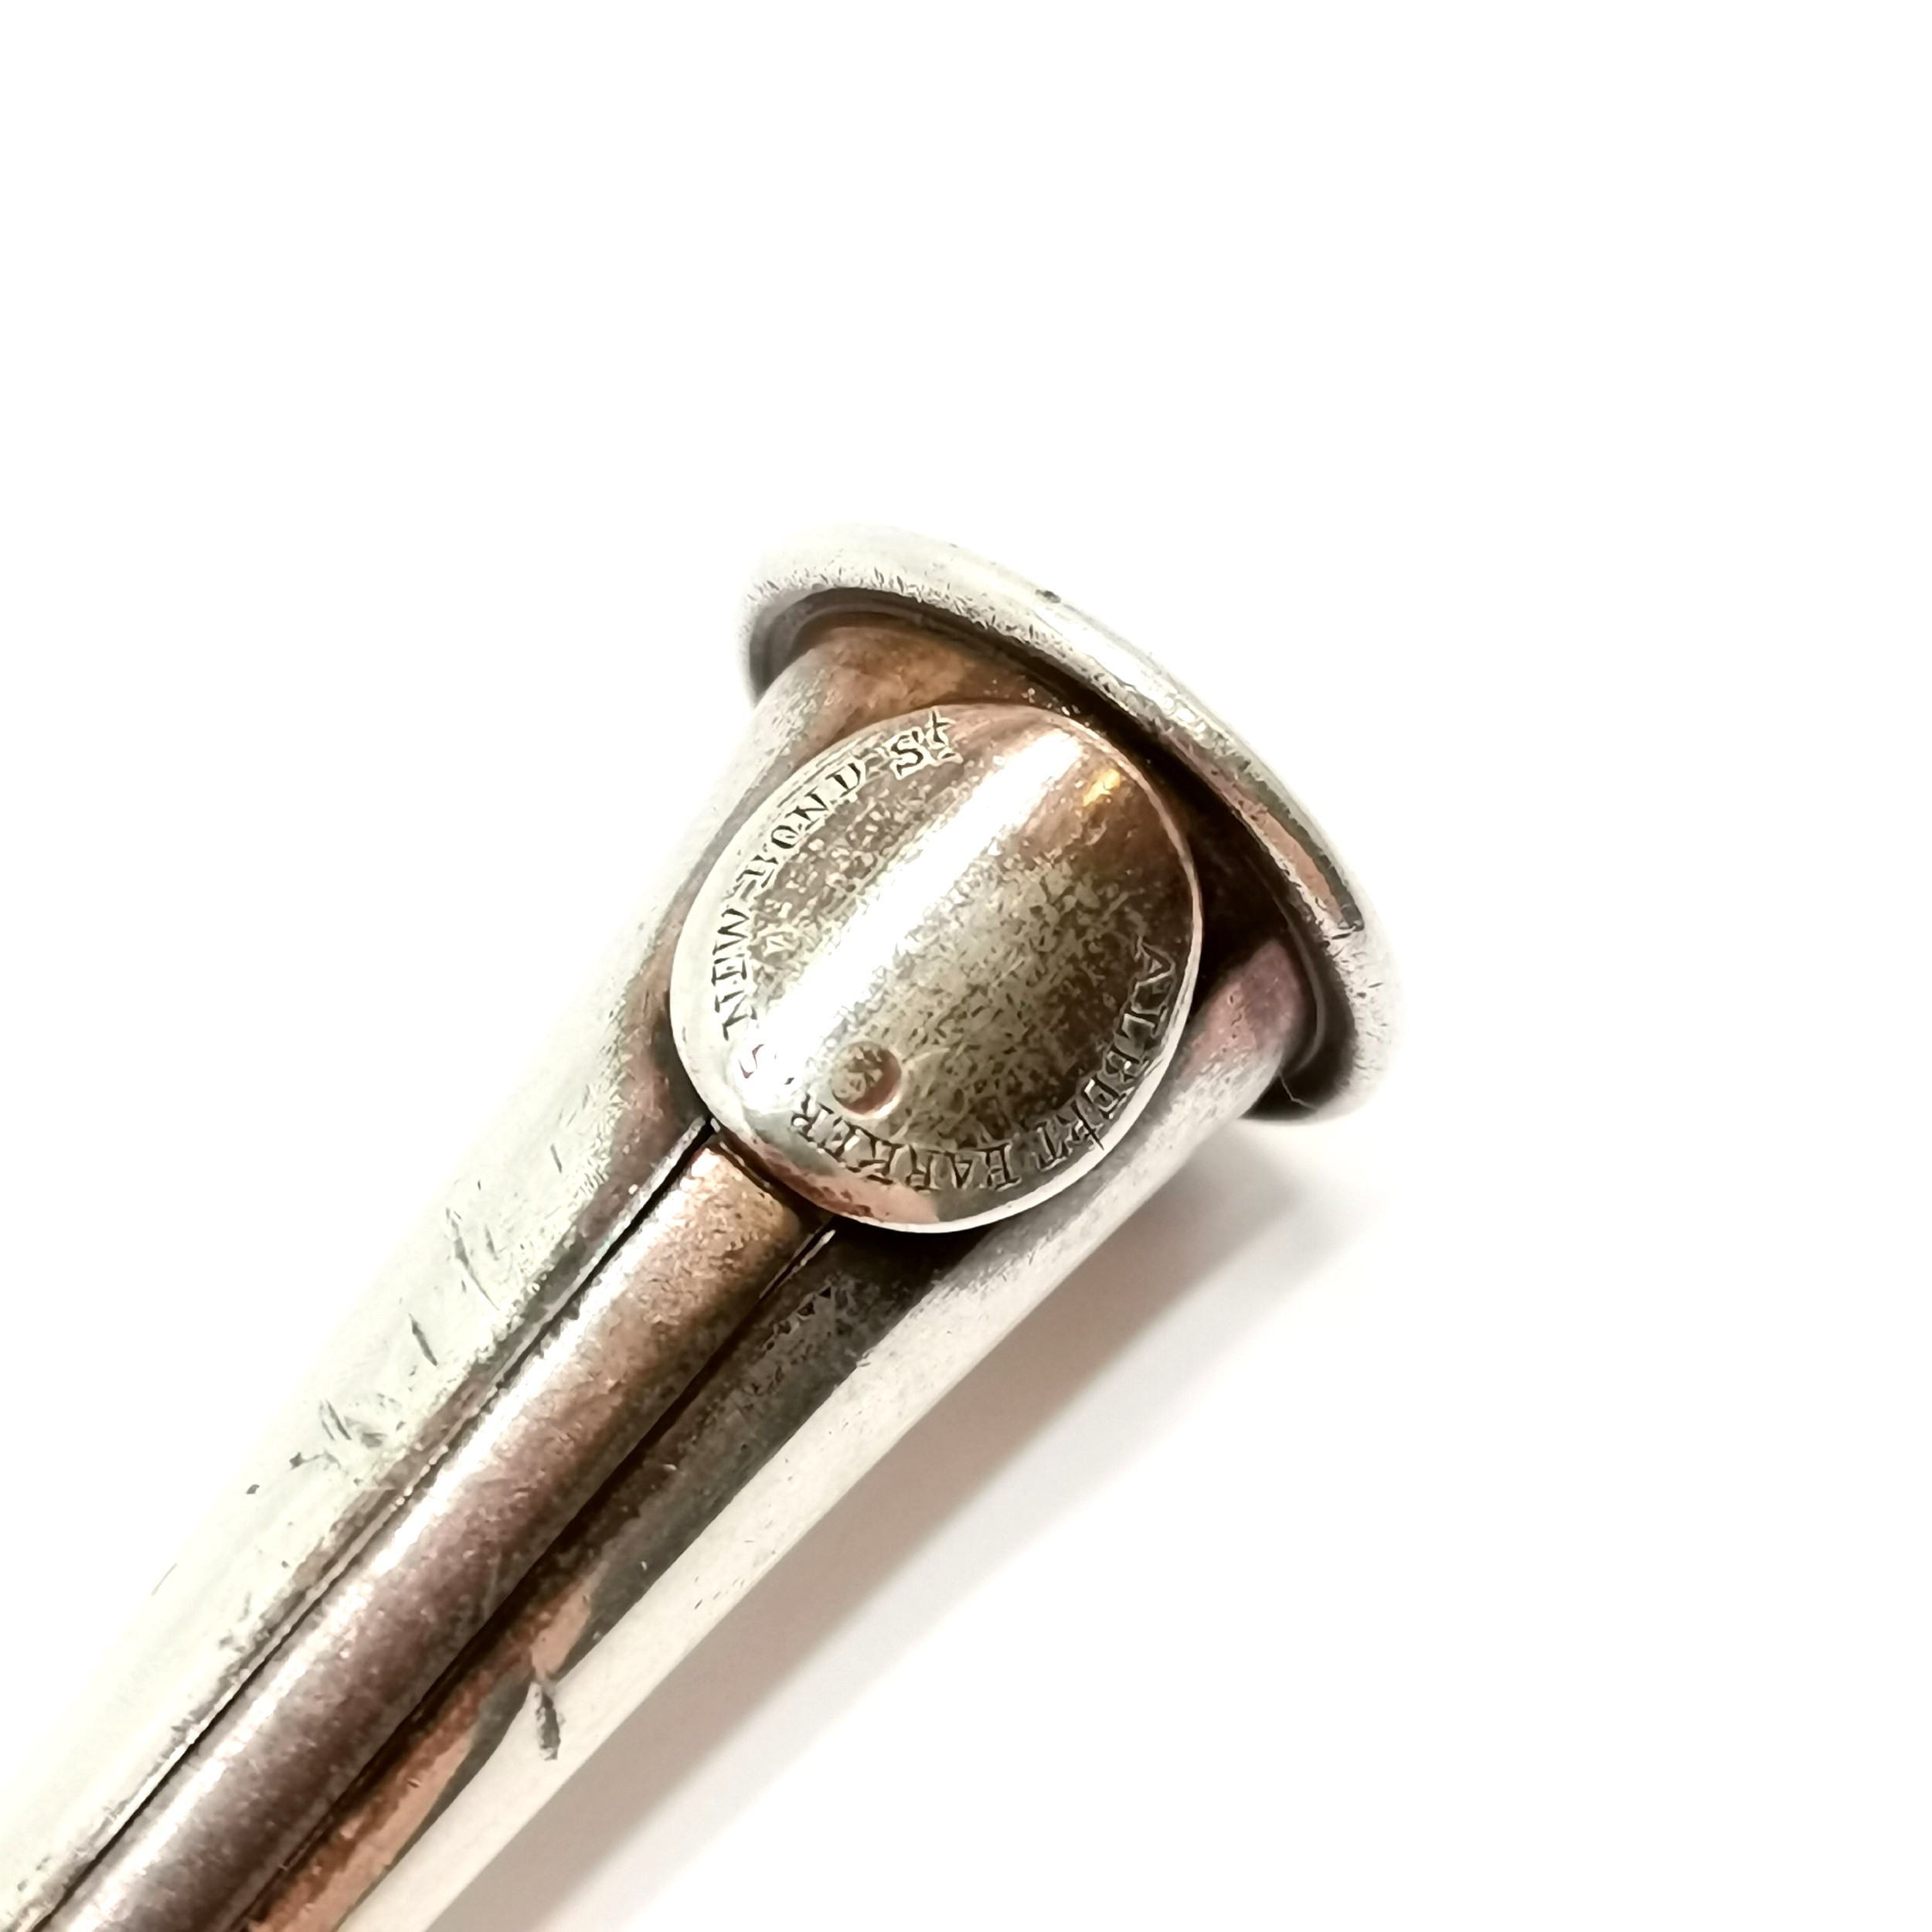 Novelty unmarked silver hunting horn propelling pencil with cigar cutter function by Albert Barker 5 - Image 4 of 4